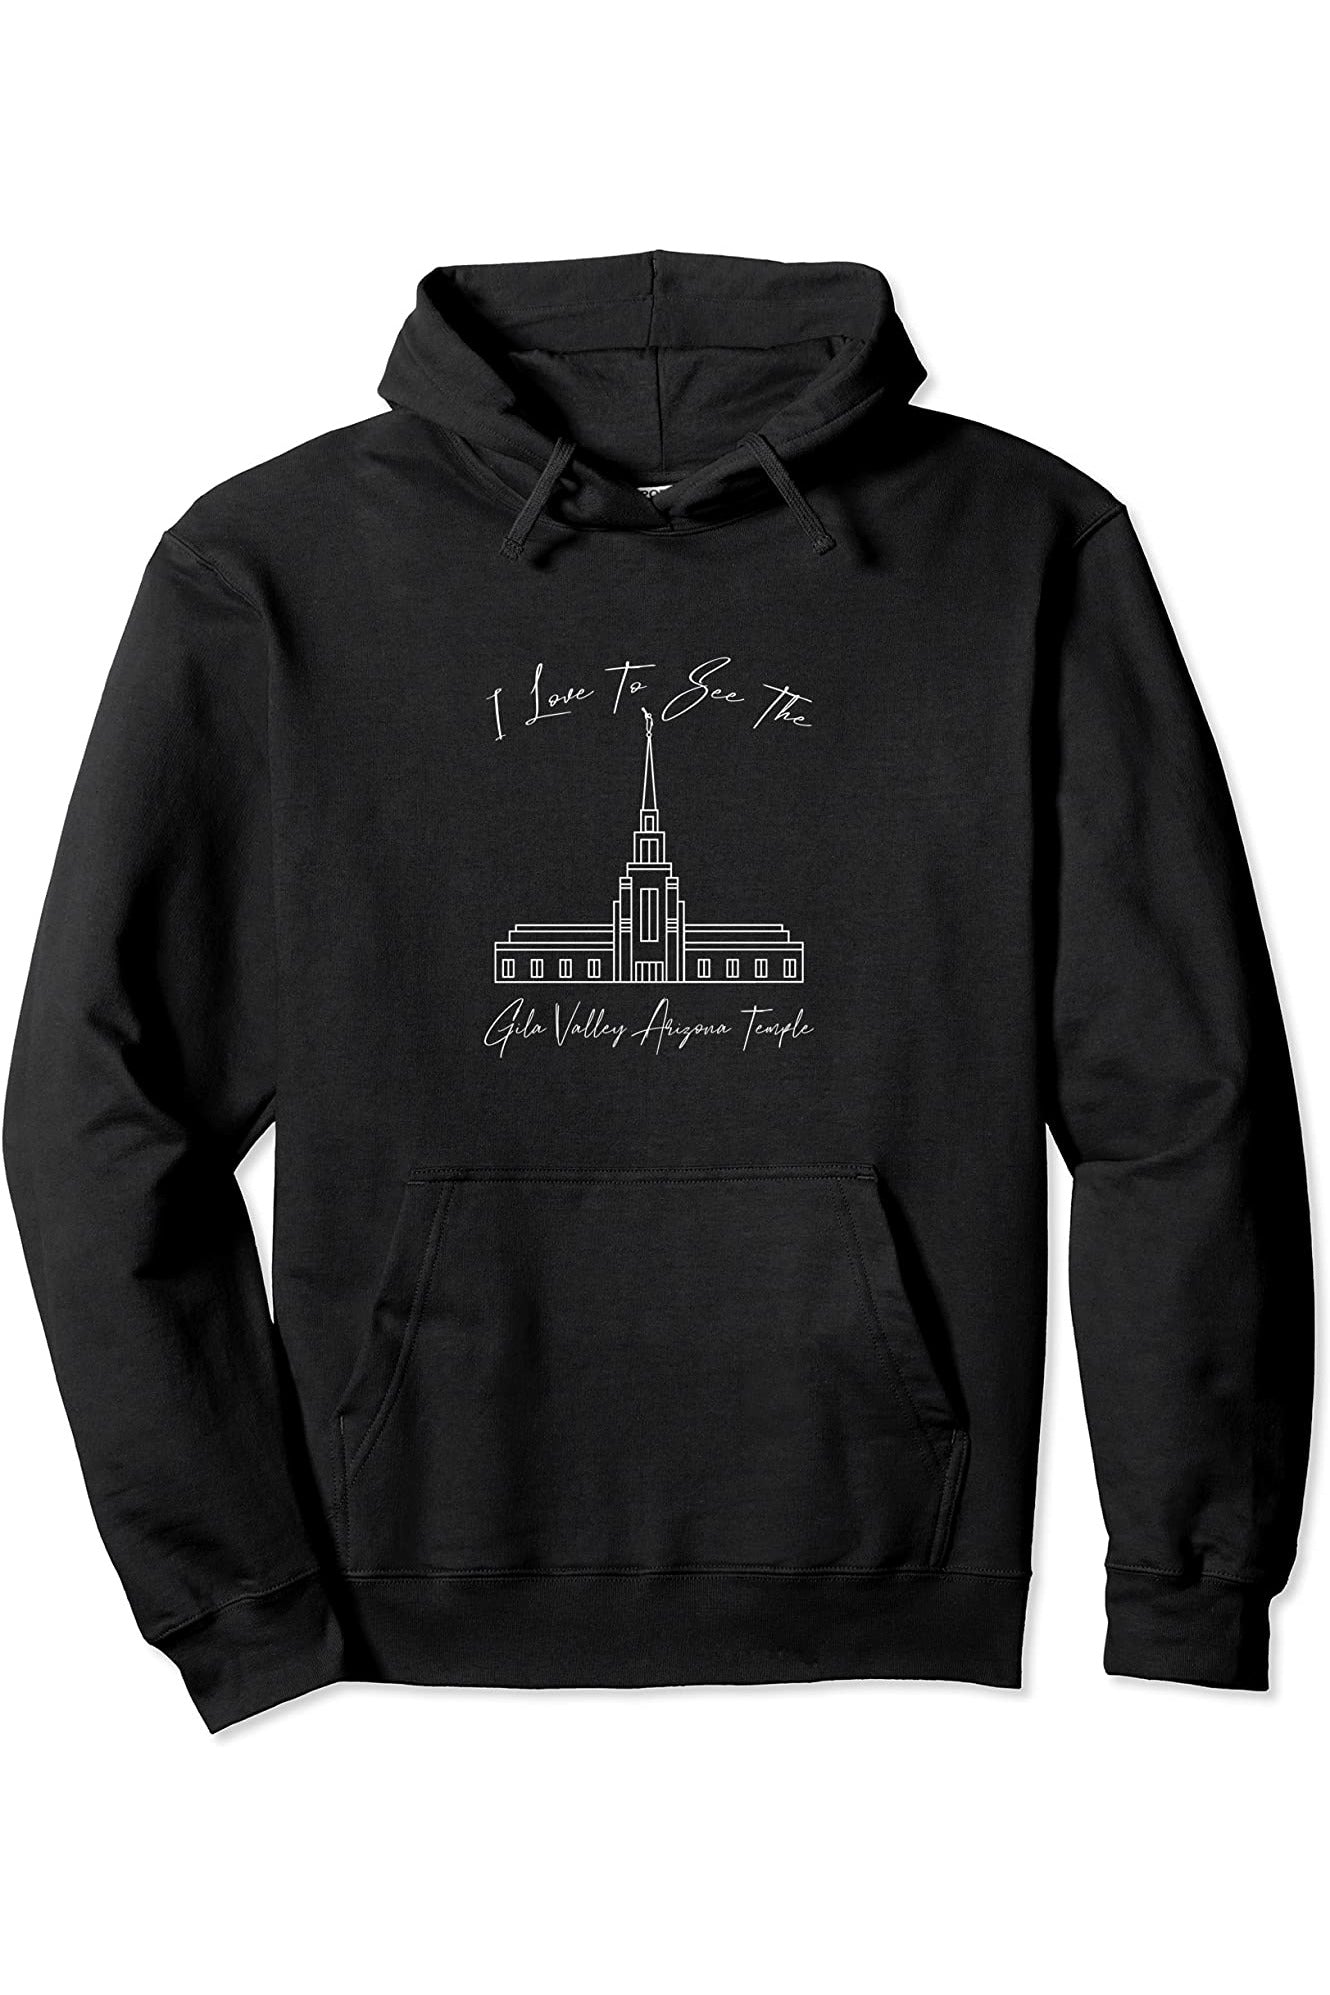 Gila Valley Arizona Temple Pullover Hoodie - Calligraphy Style (English) US